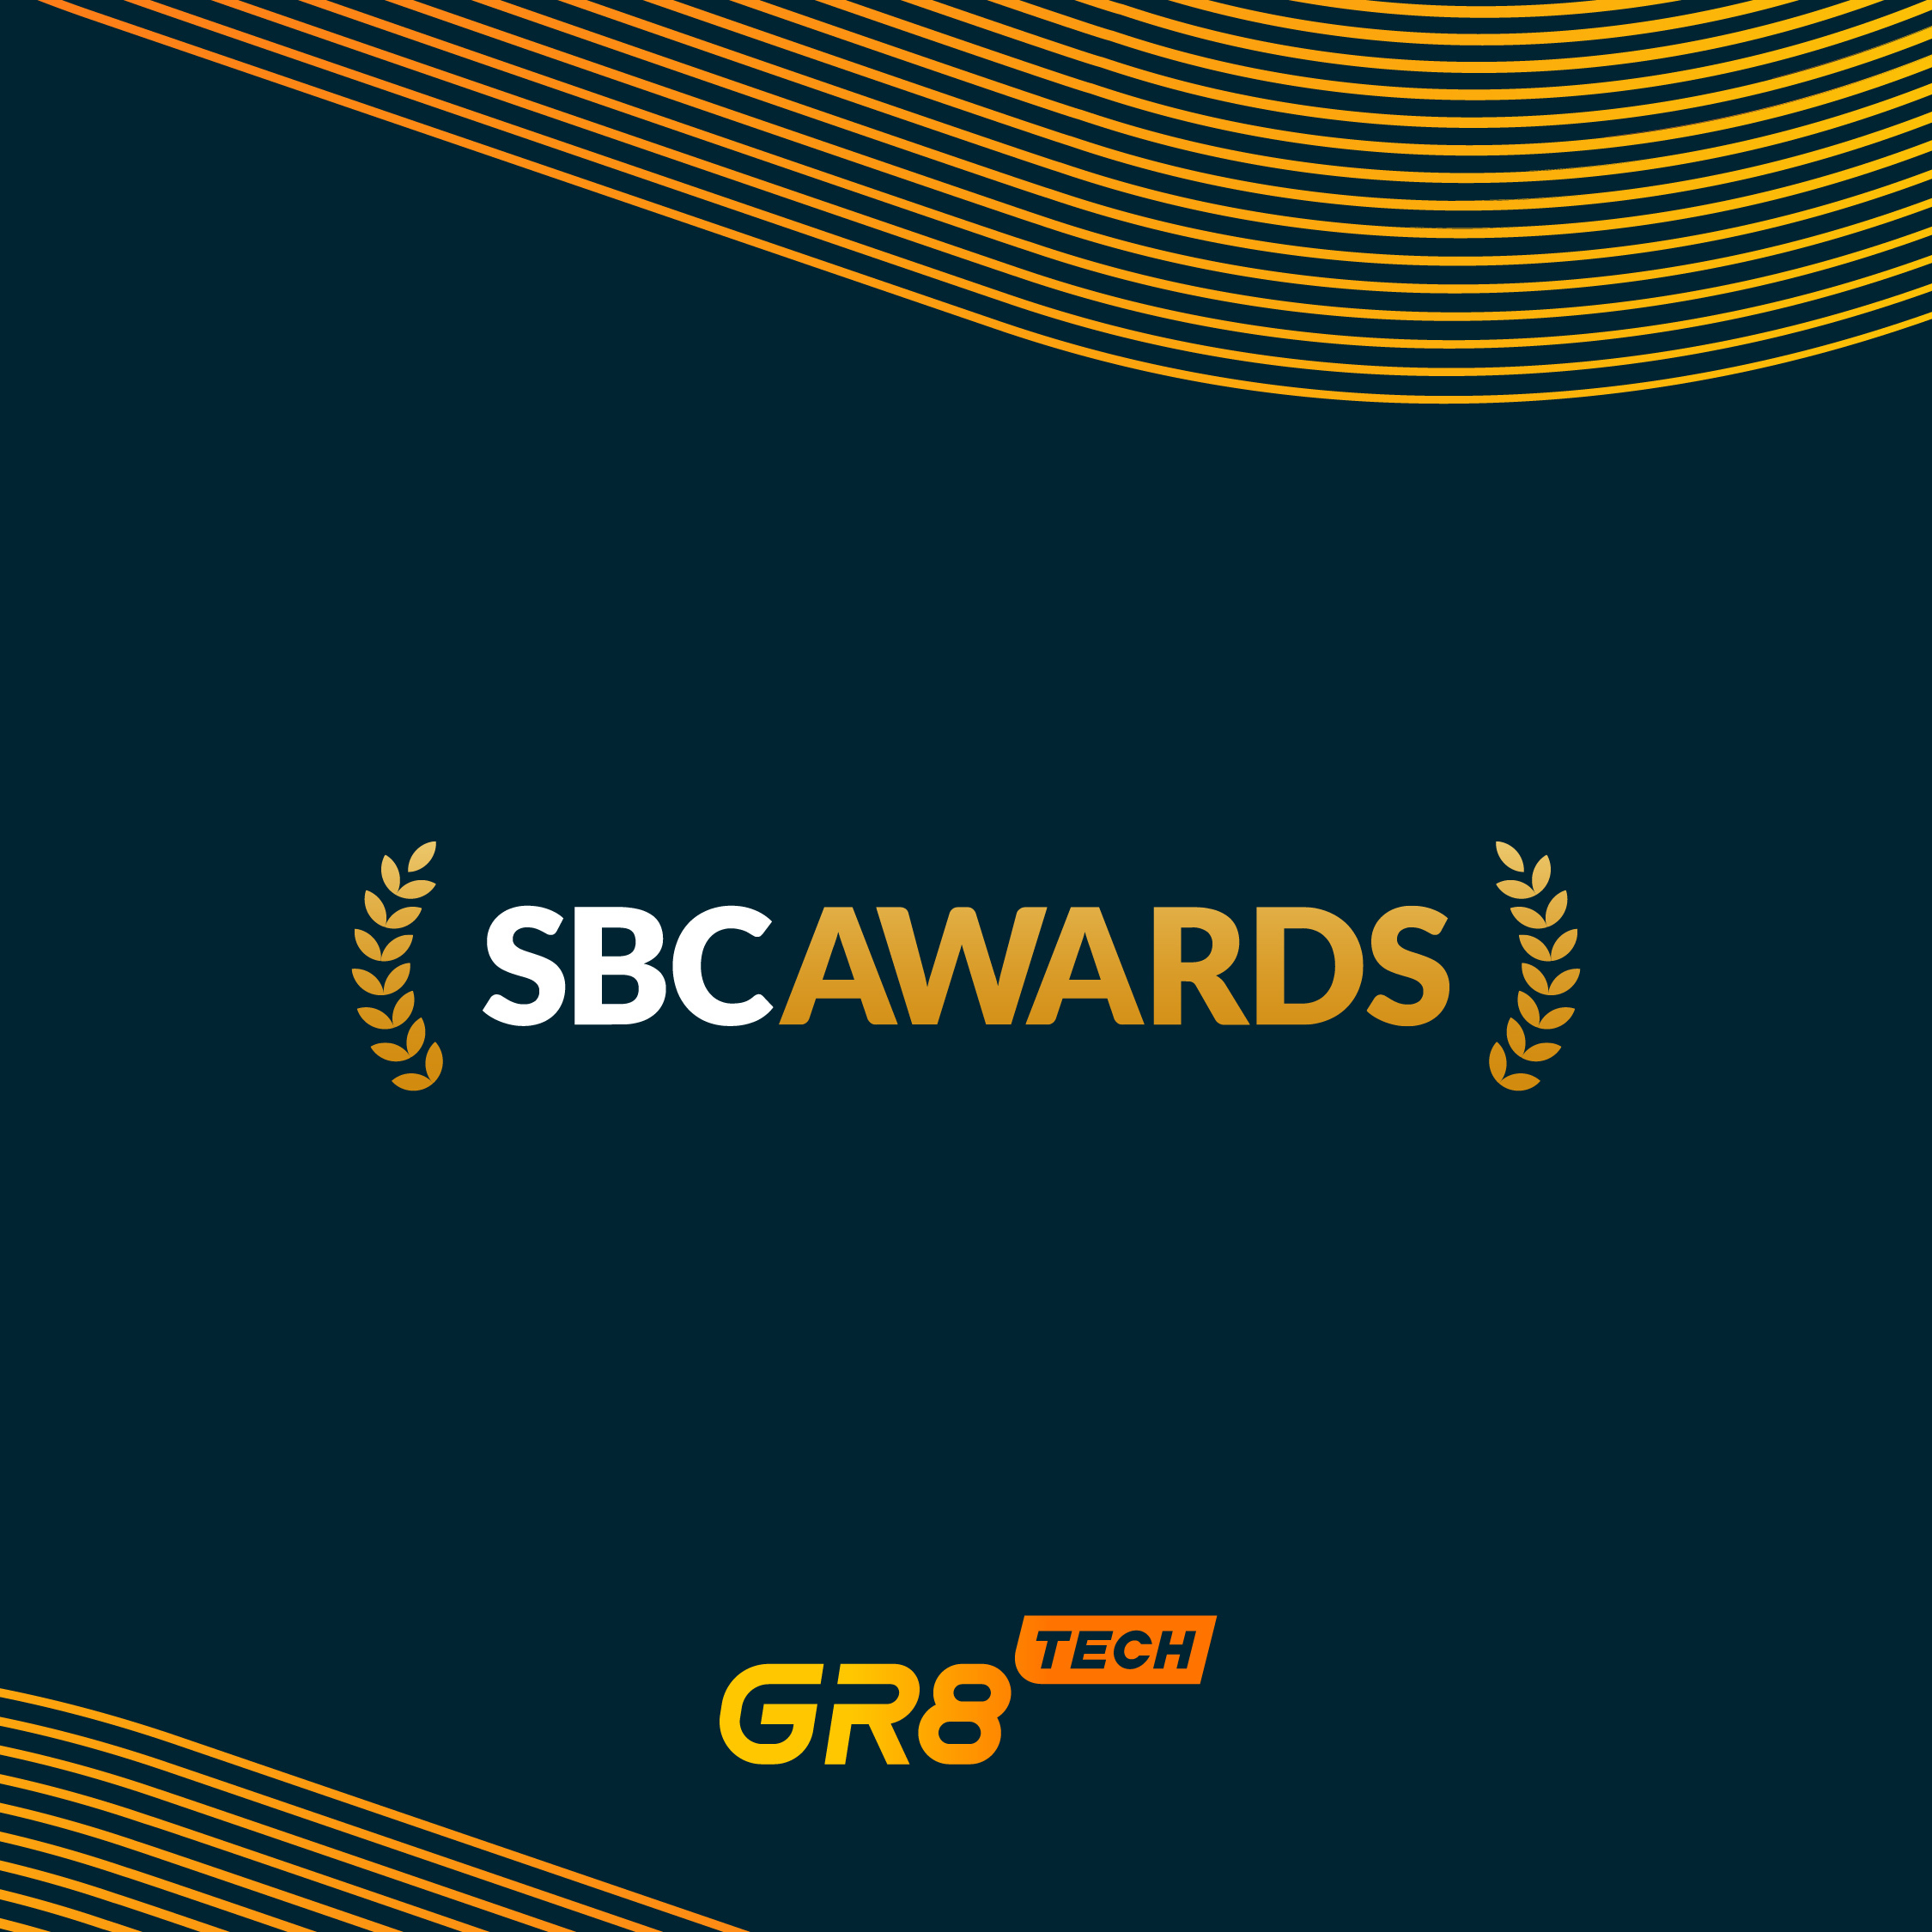 GR8 Tech Scores Double Nomination in SBC Awards